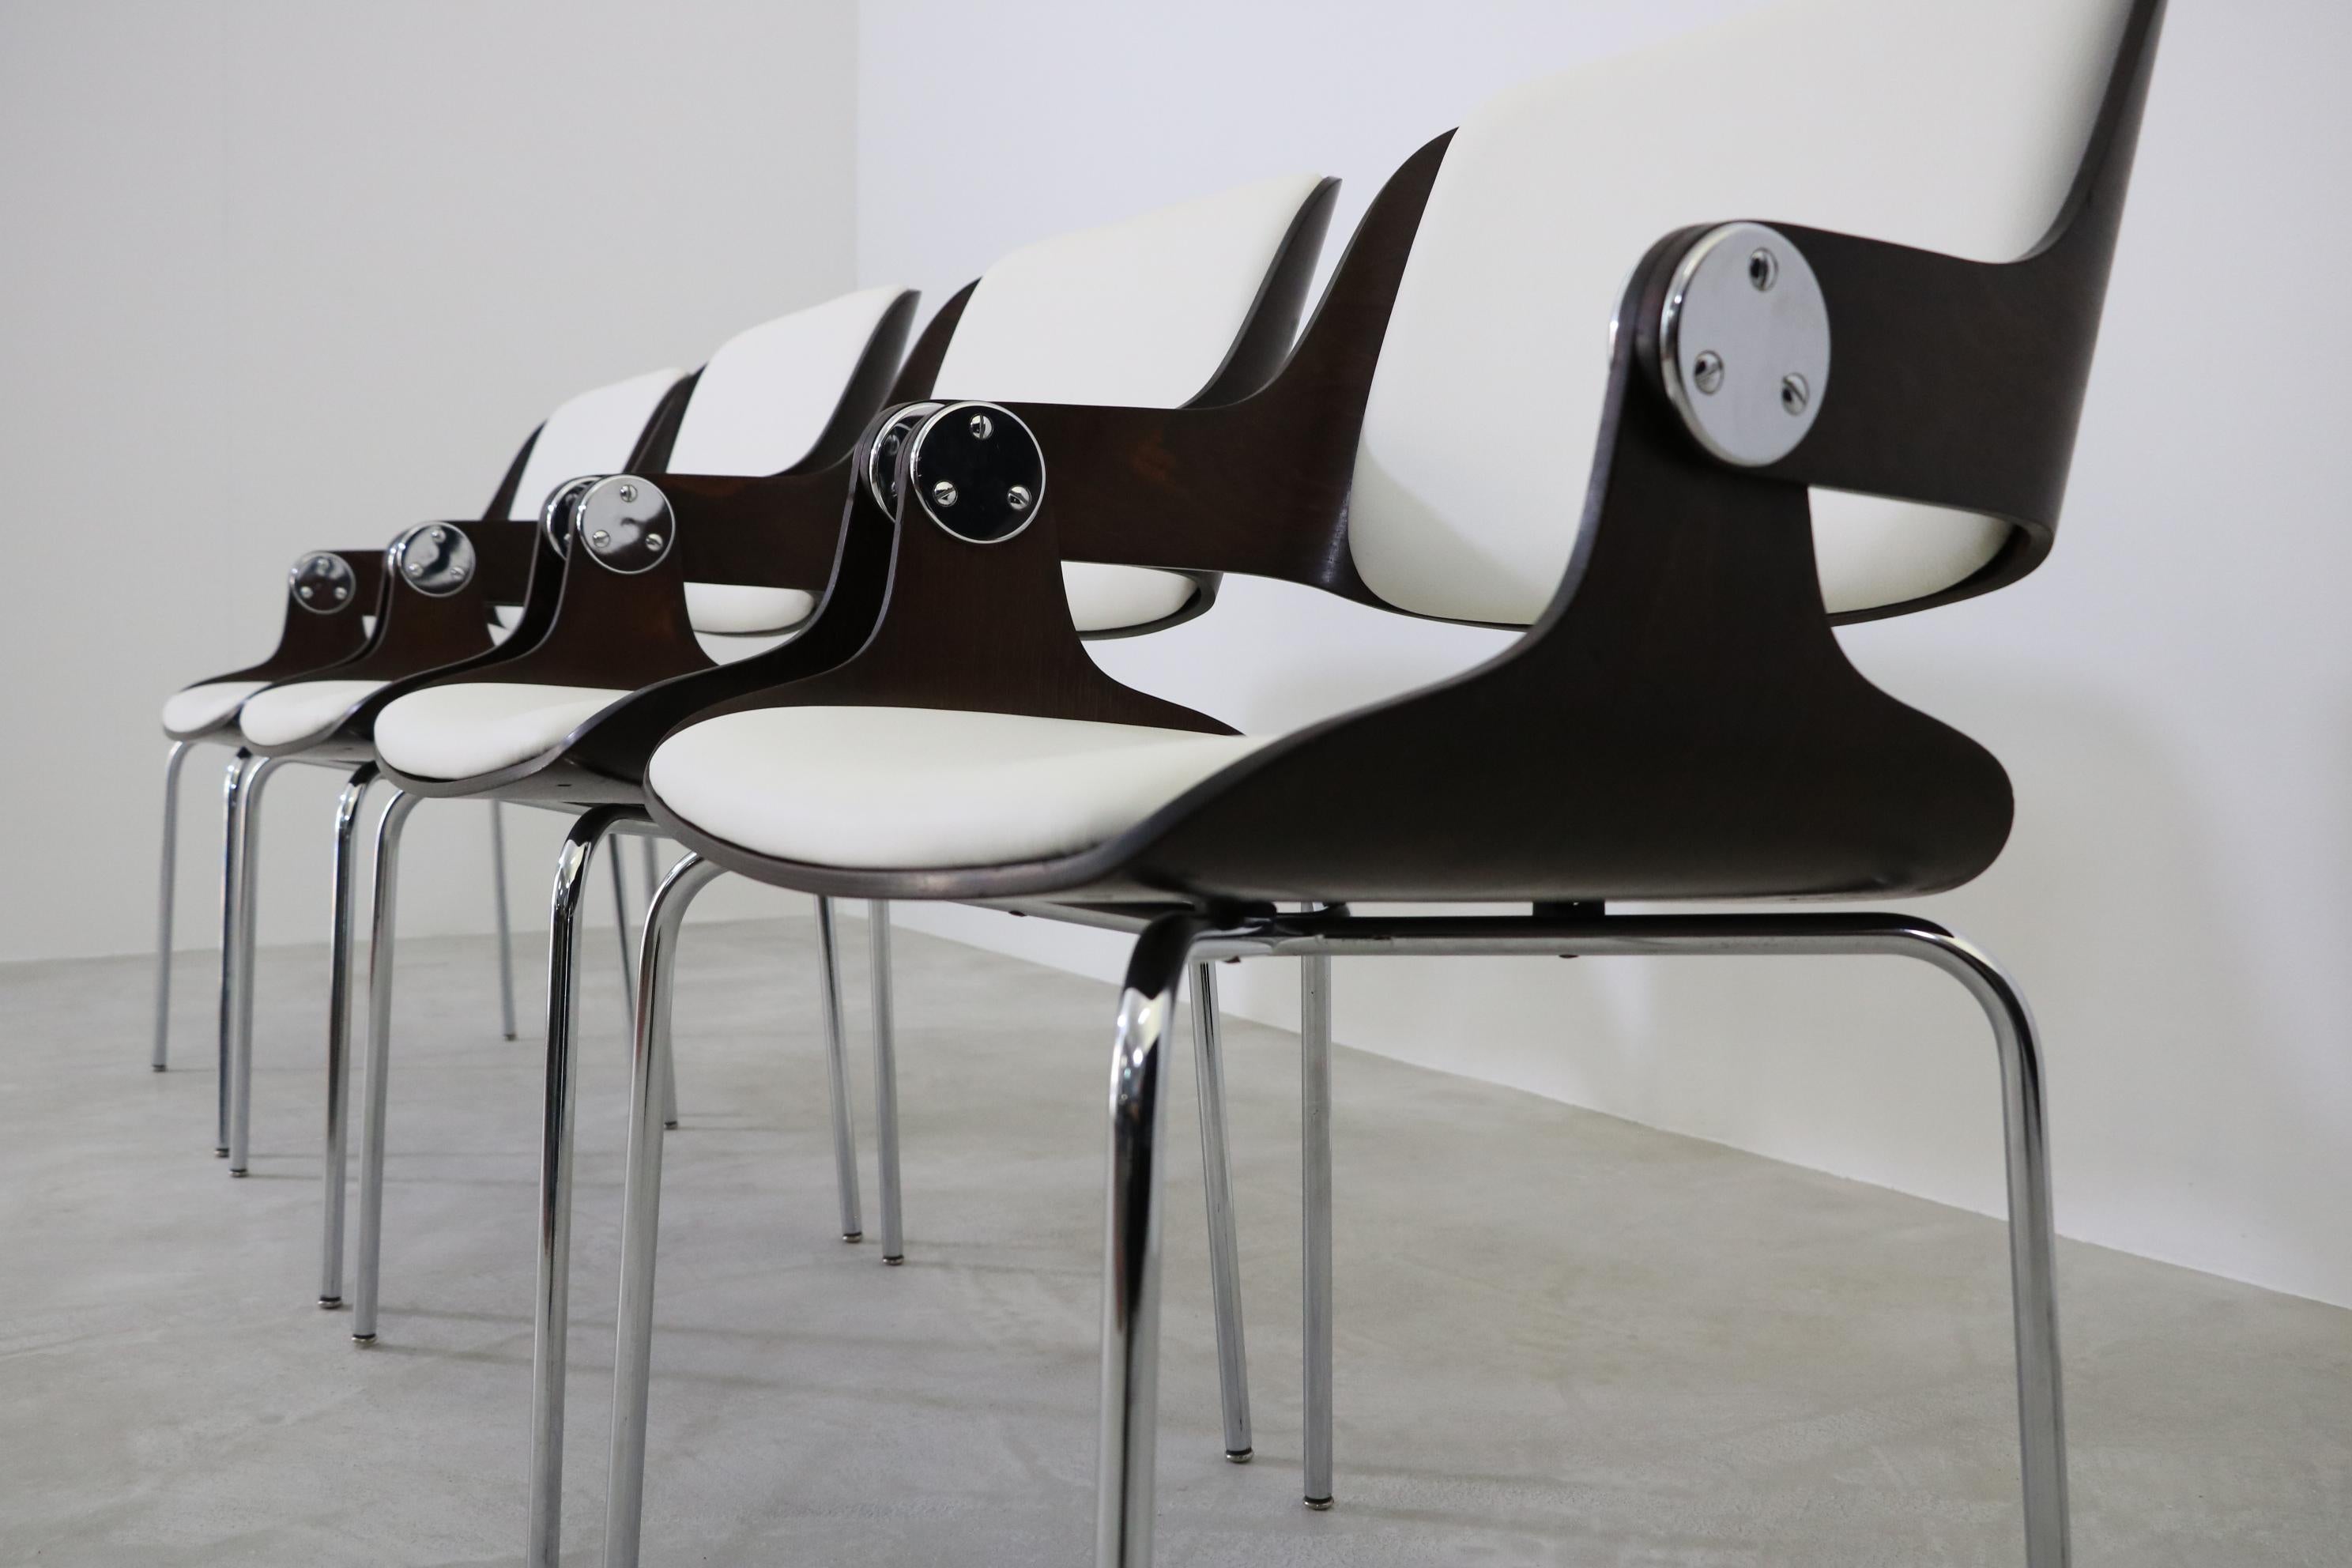 Dining or conference chair by the German Achritect Eugen Schmidt, produced by ES-Eugen Schmidt Darmstadt 1965.
Chromed metal frame, seat and back plywood bent dark stained, upholstered cover leather white, W 58 cm H 88 cm ST 46 cm.
Re-upholstery